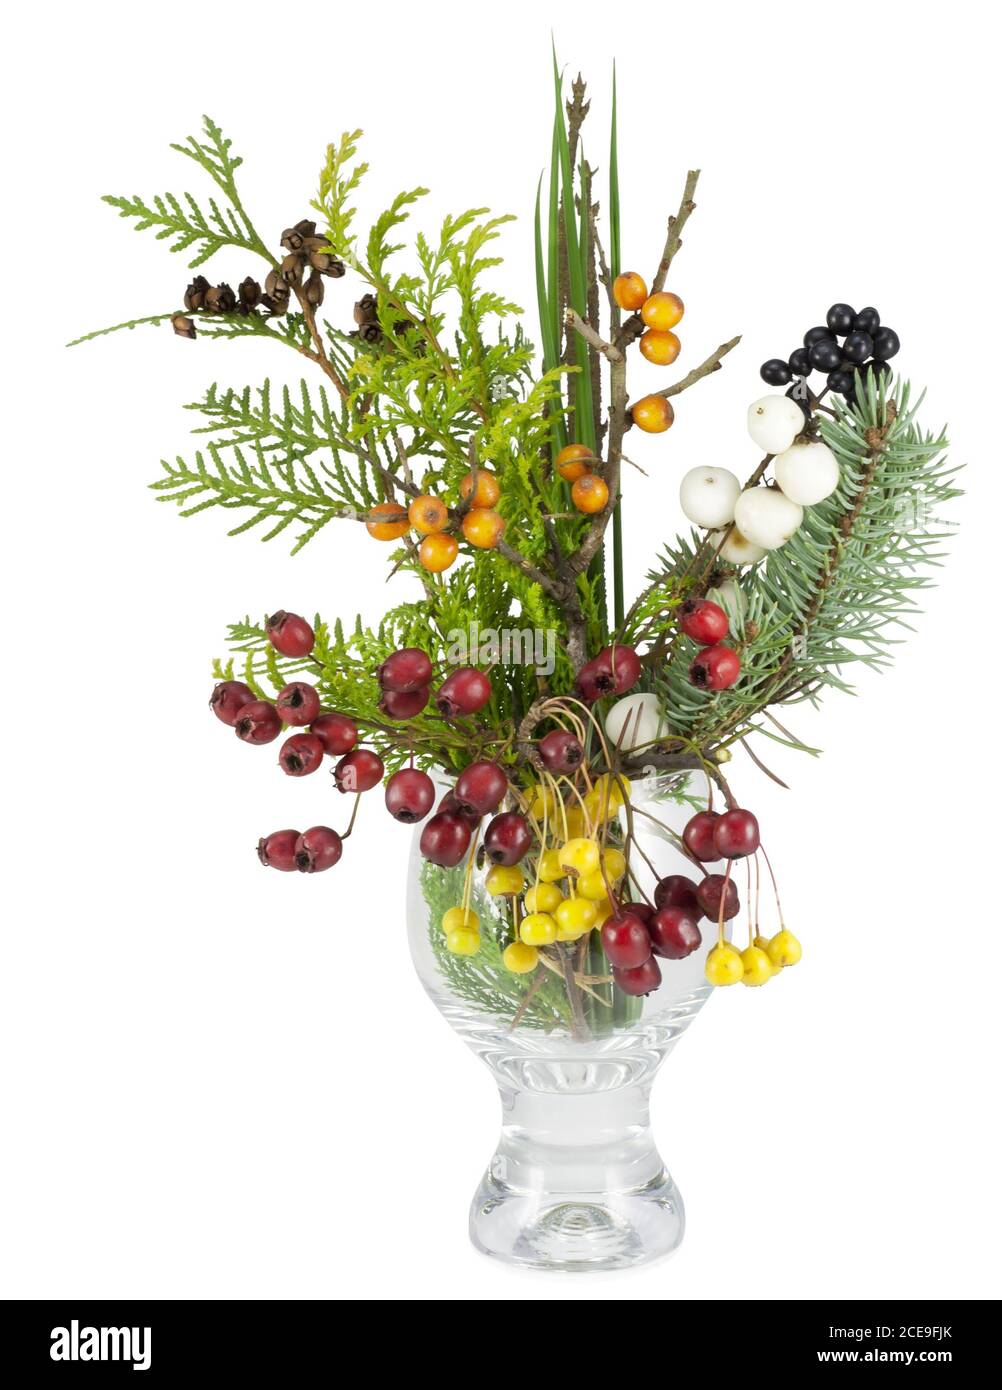 Christmas bouquet with wild wood berries isolated Stock Photo